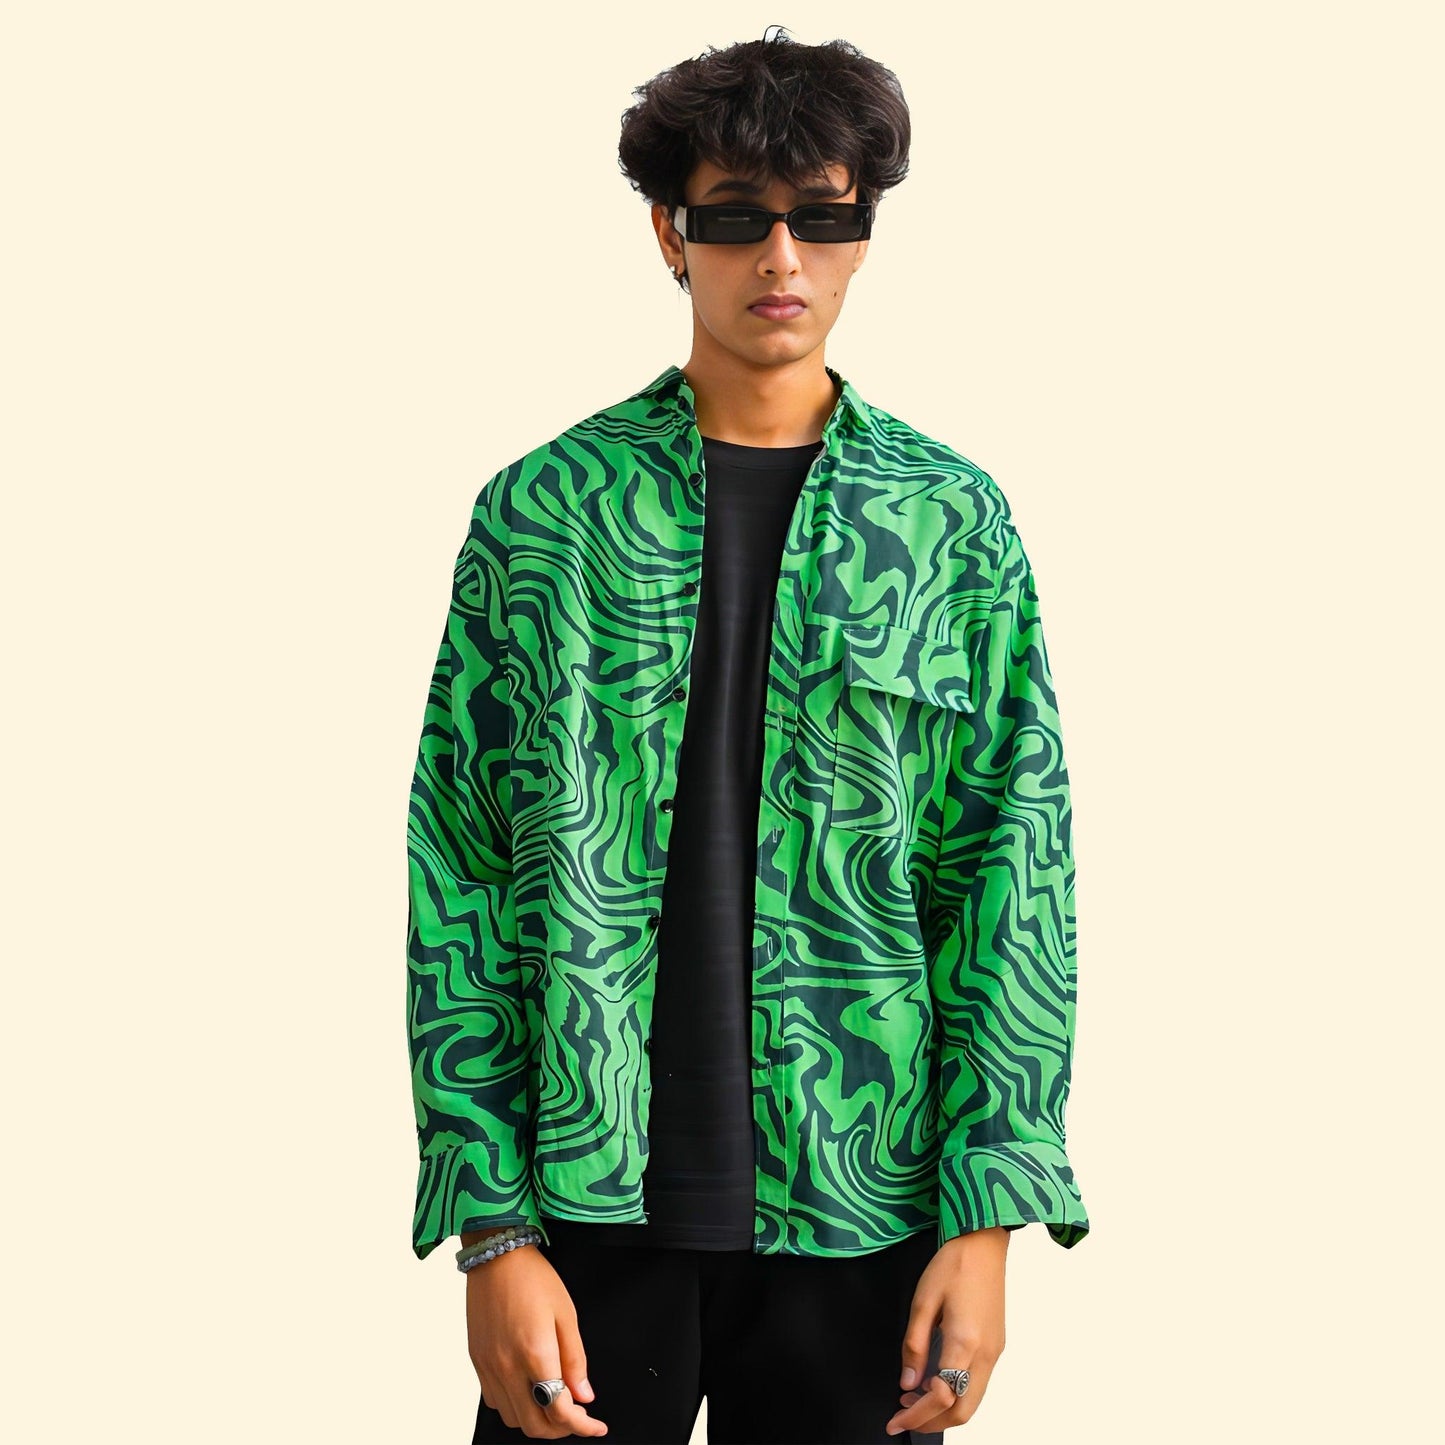 LOOPSTER Men's Green Zebra Design Baggy Fit Shirt With Double Pockets - Loopster